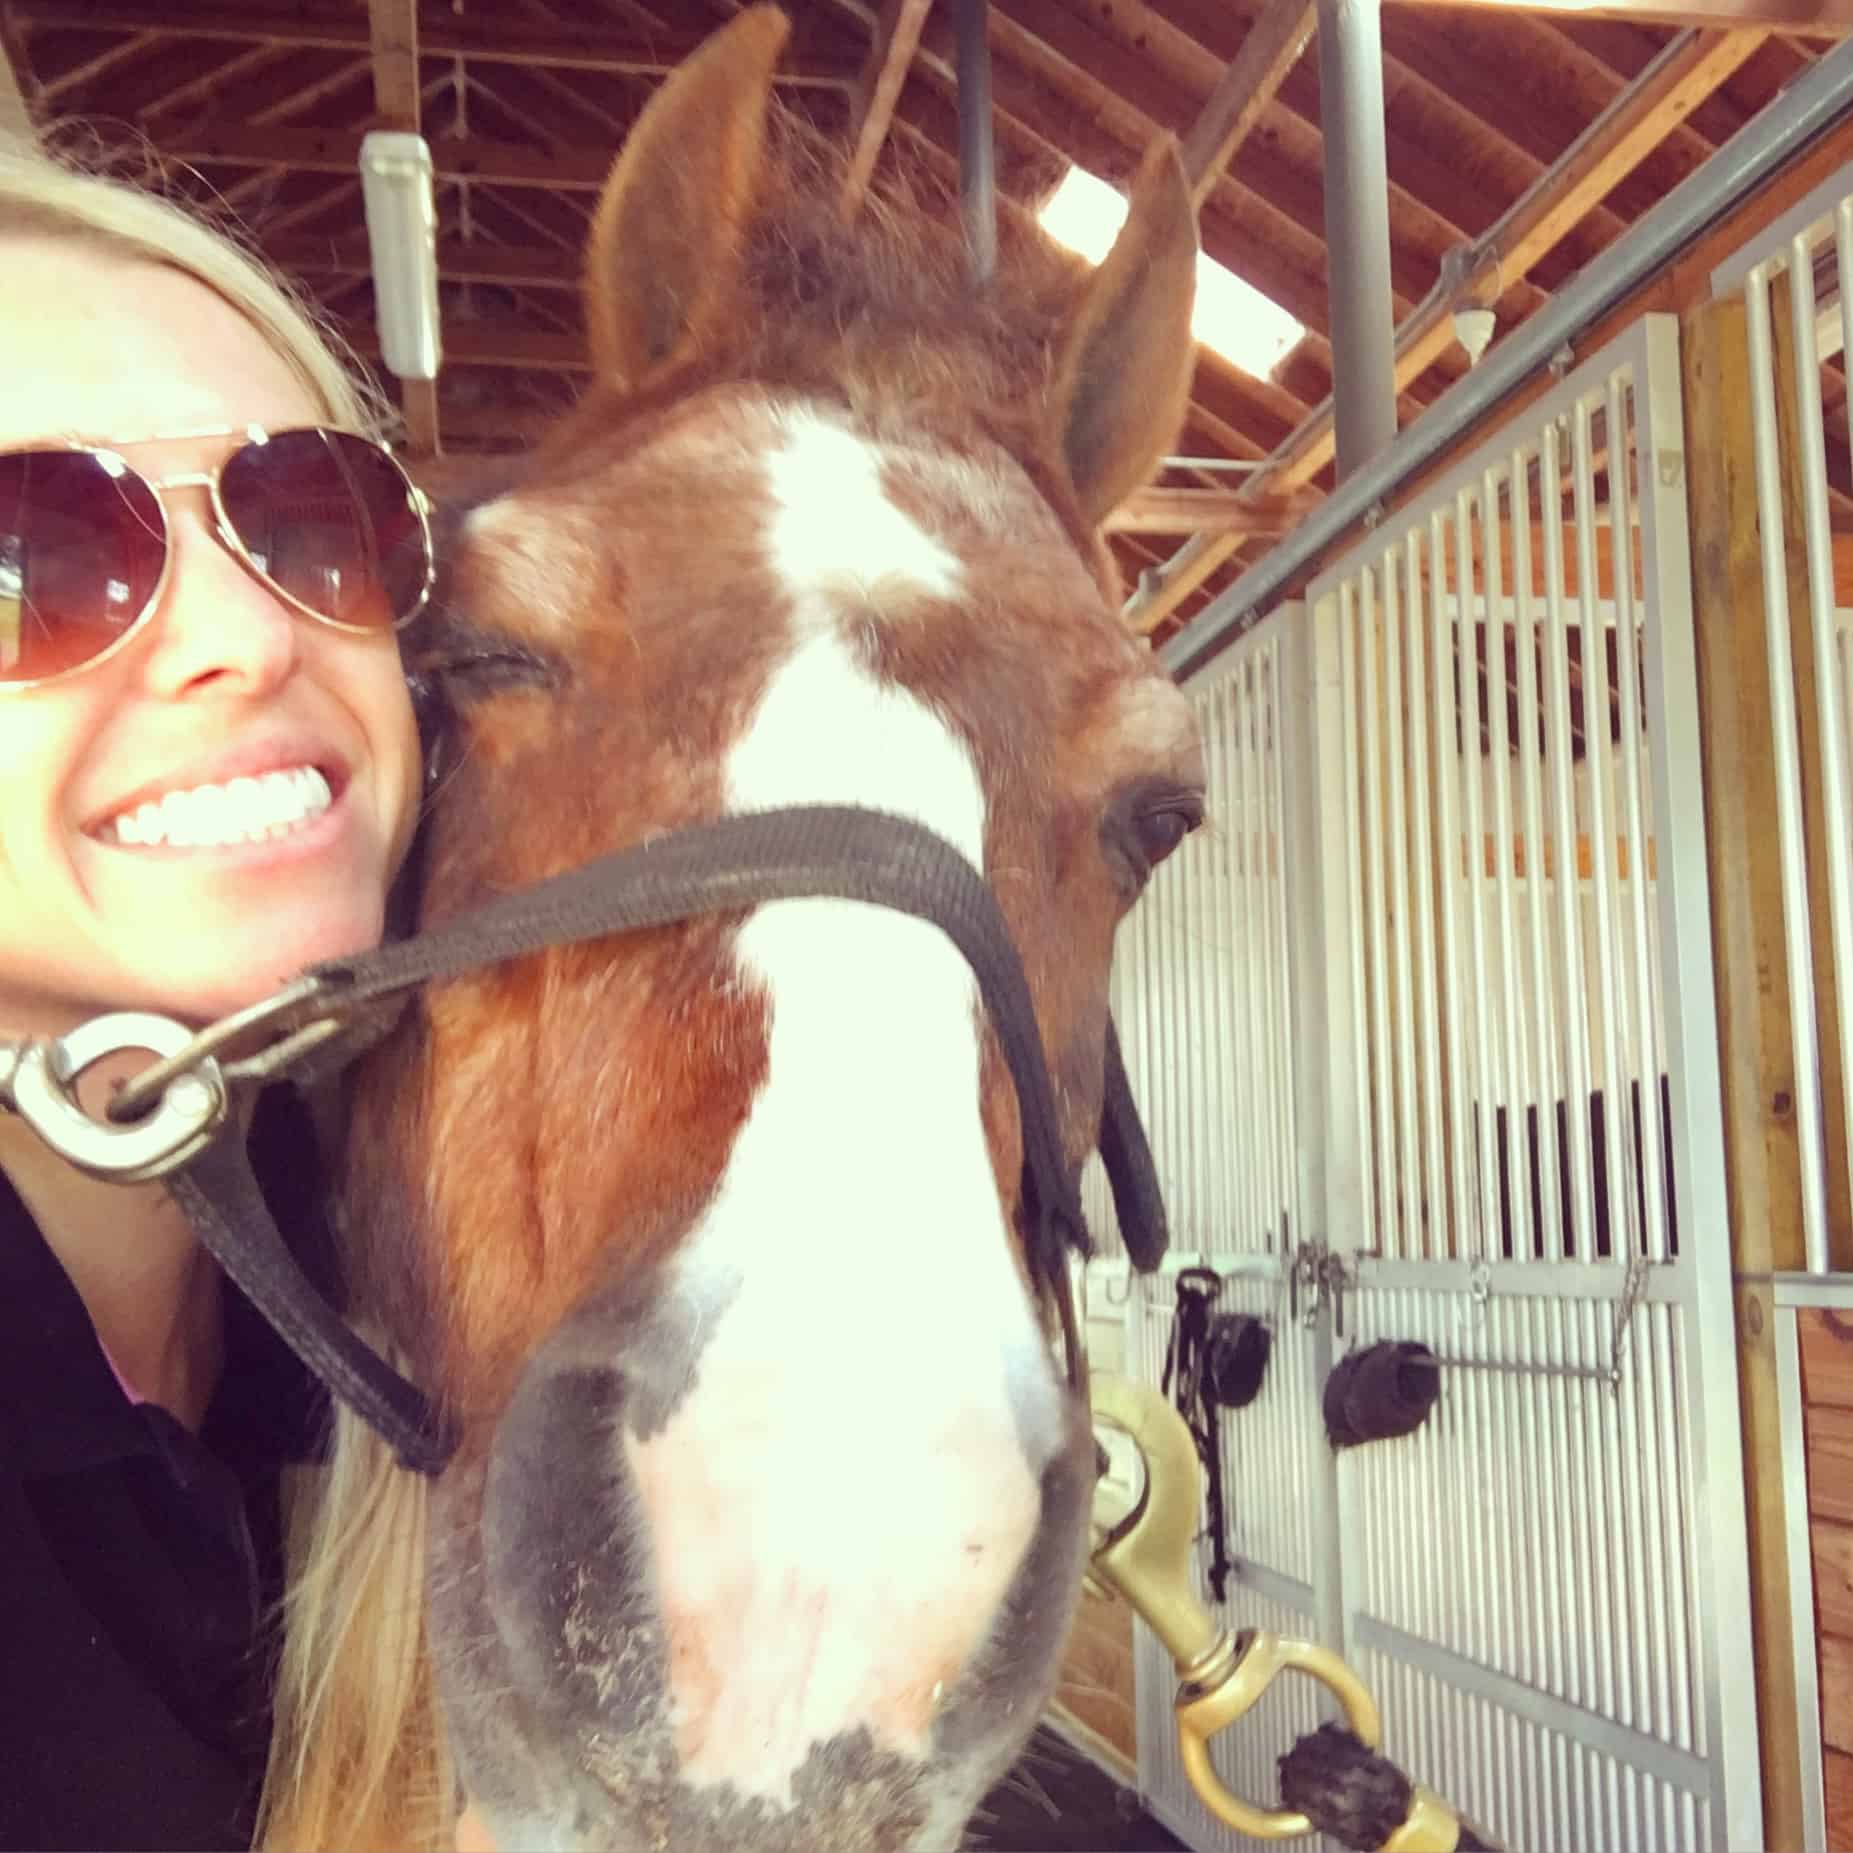 10 Ways To Tell You’re Dating A Horse Gal